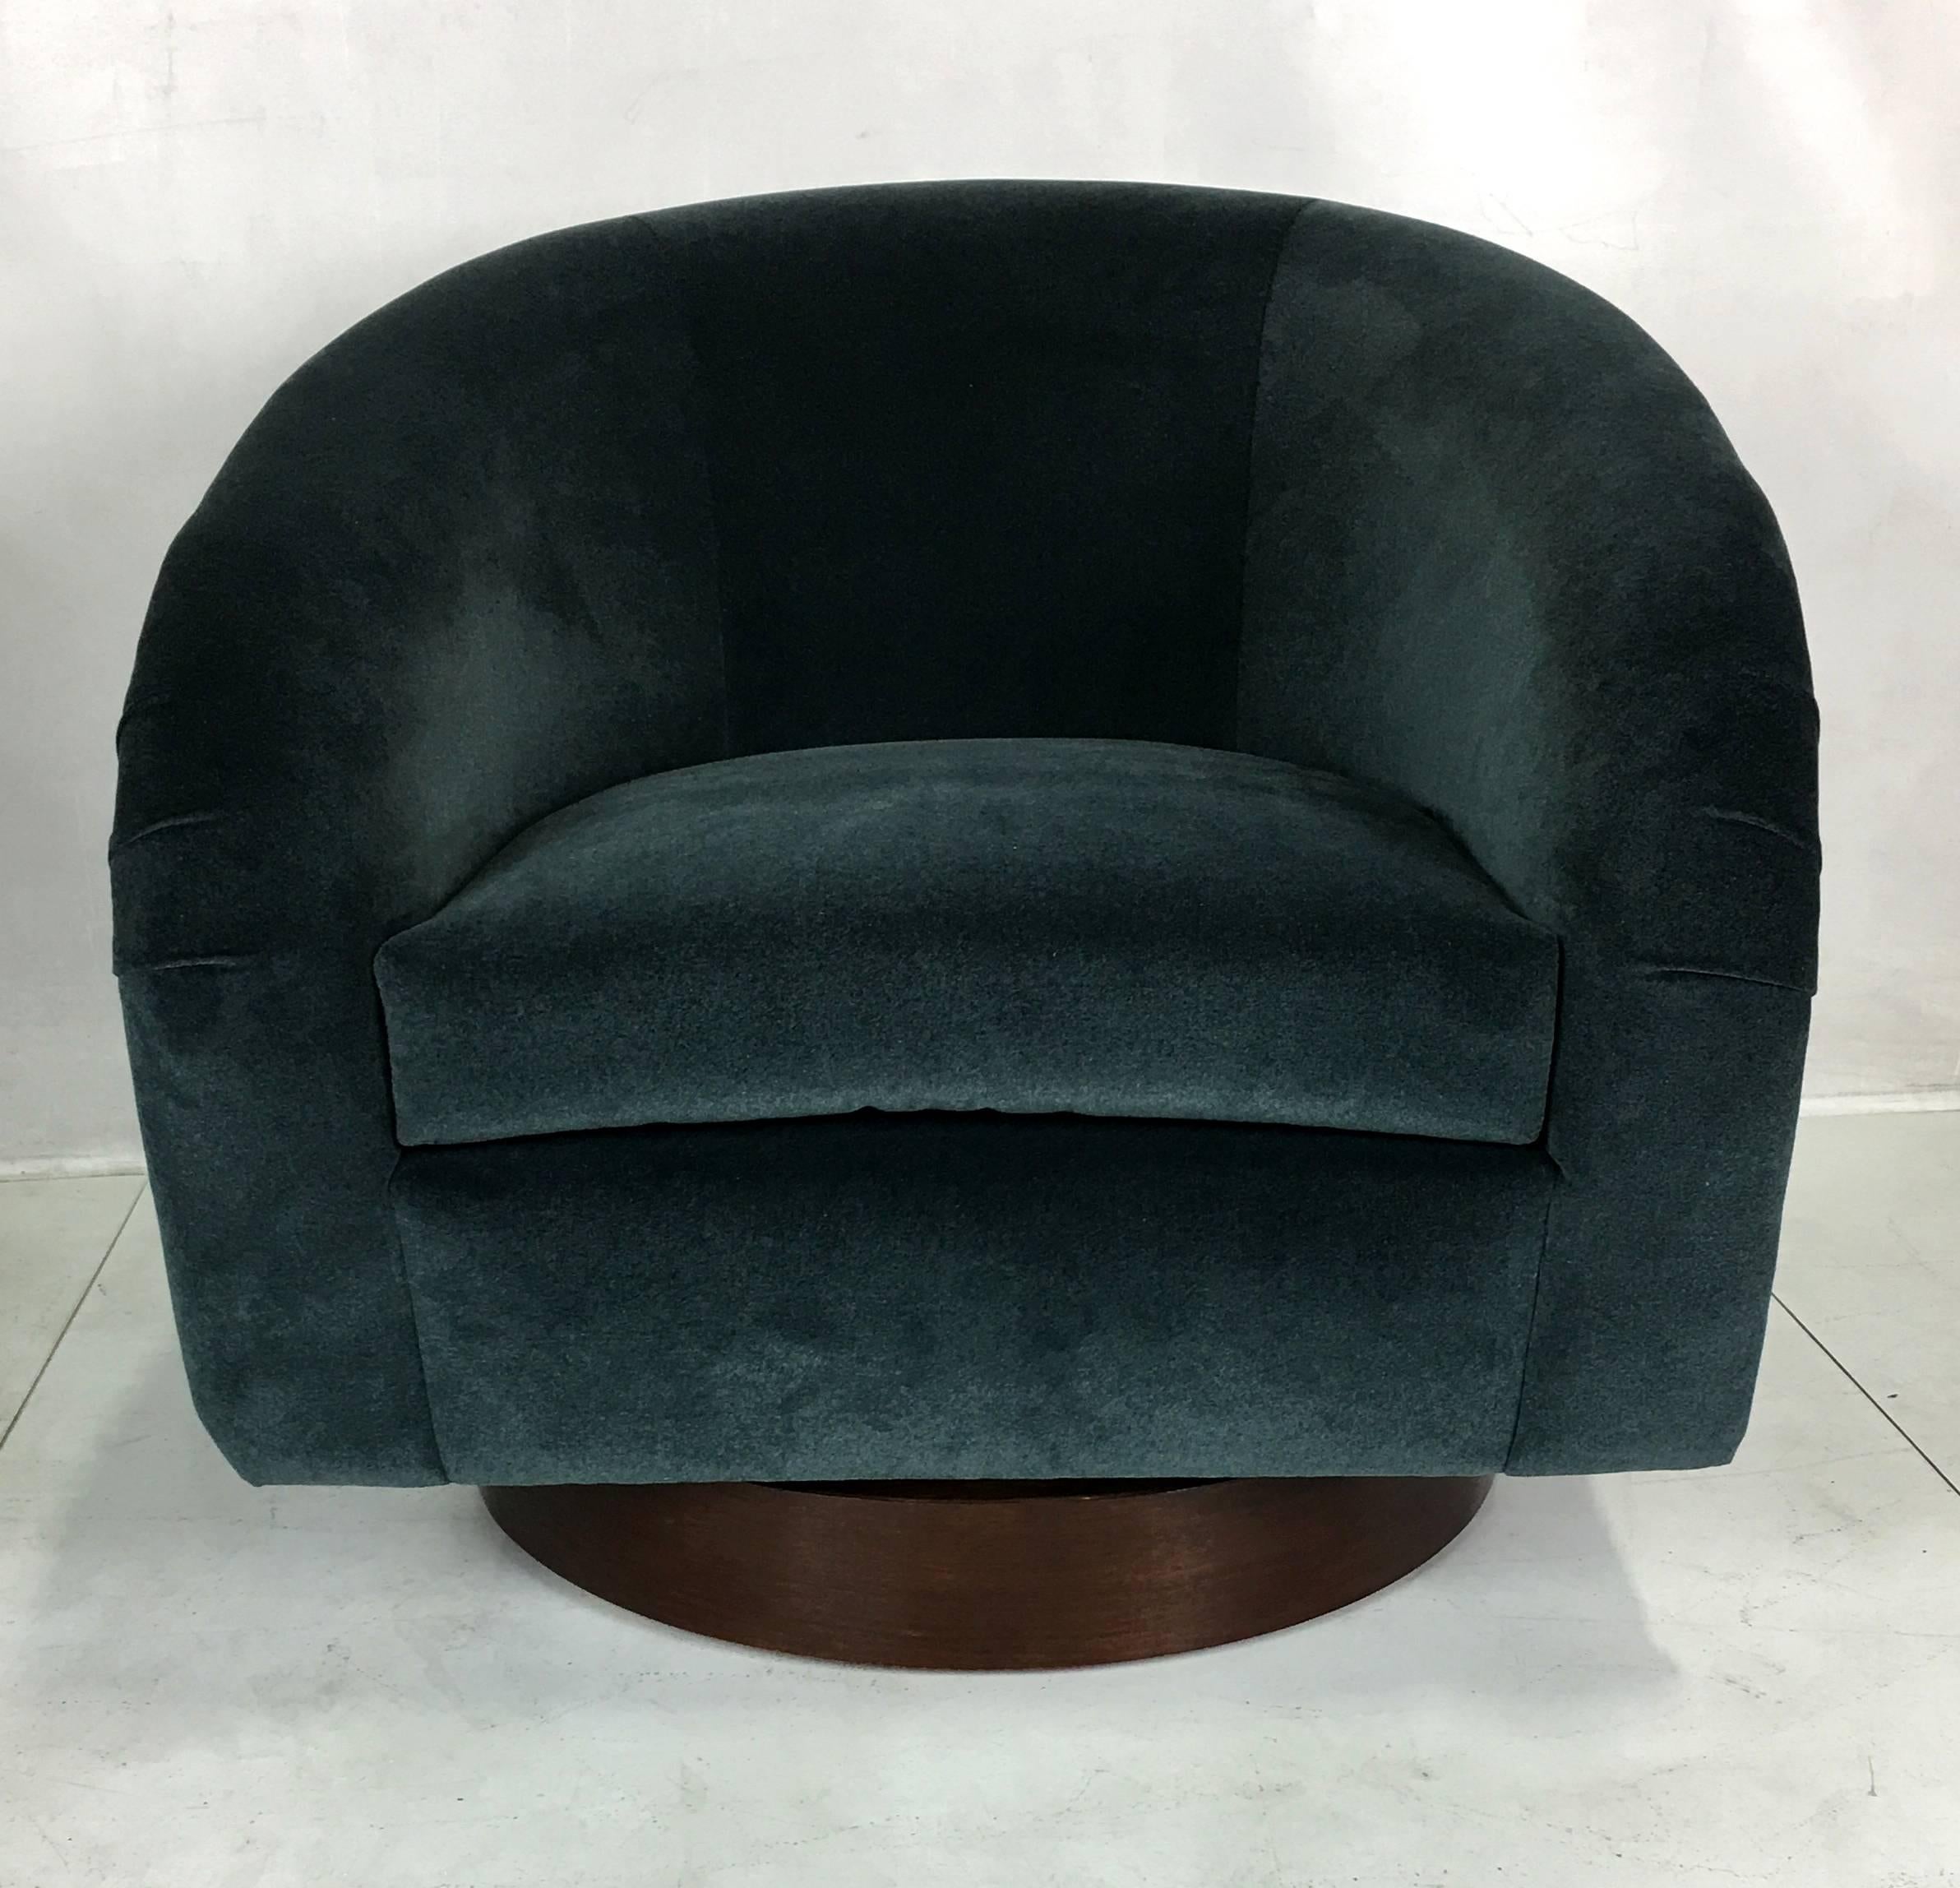 Pair of swivel lounge chairs by Milo Baughman. The pair have been restored from the ground up; reglued, reupholstered, refinished bases, new swivel plates, foam and Dacron, and covered in a luxurious heavyweight charcoal grey velvet.